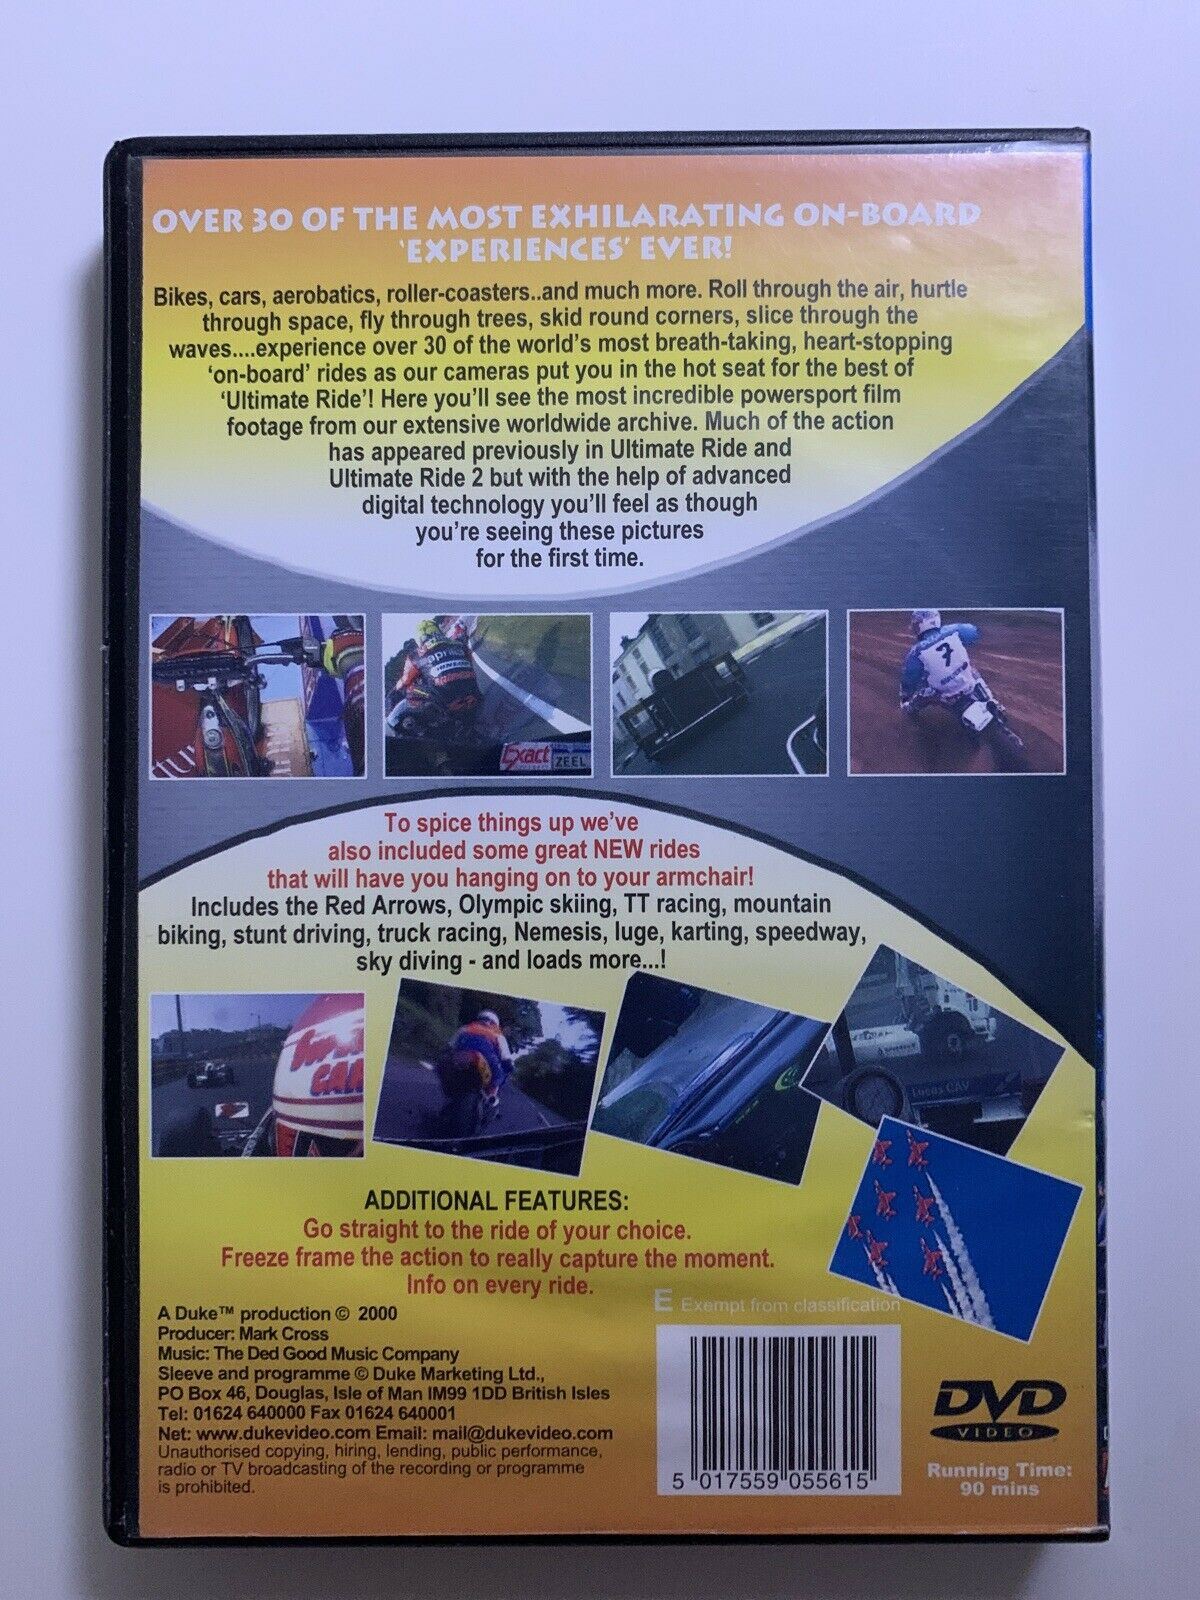 The Best of ULTIMATE RIDE 1 & 2 [Region 4] - DVD - Free Shipping.